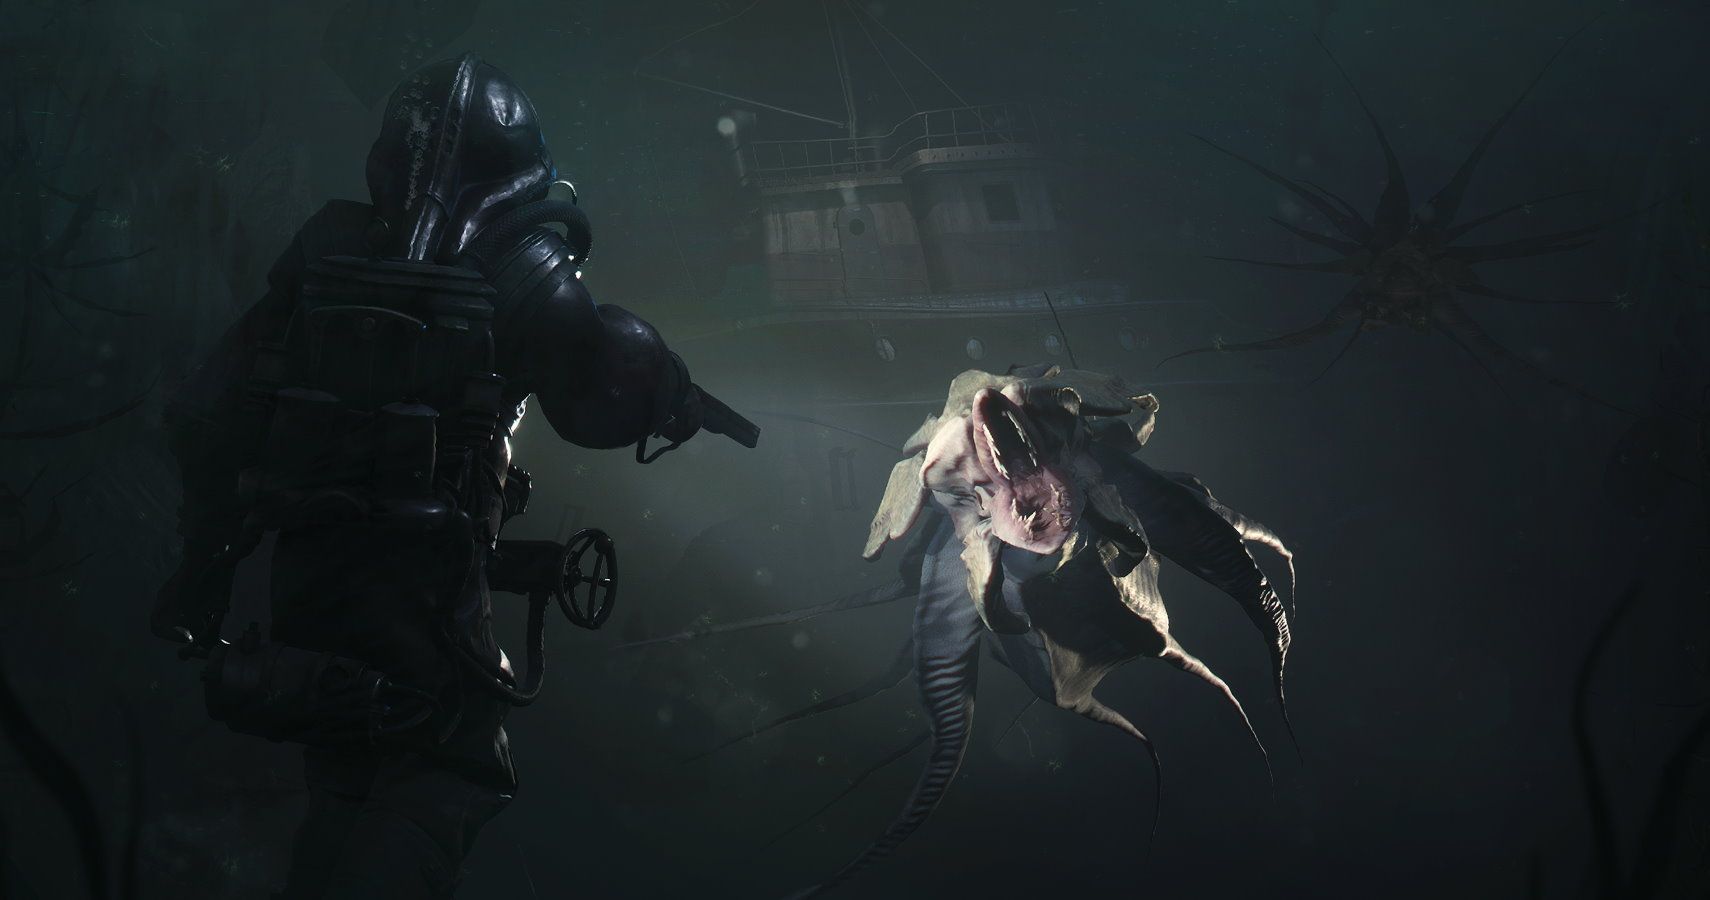 download the sinking city frogwares for free